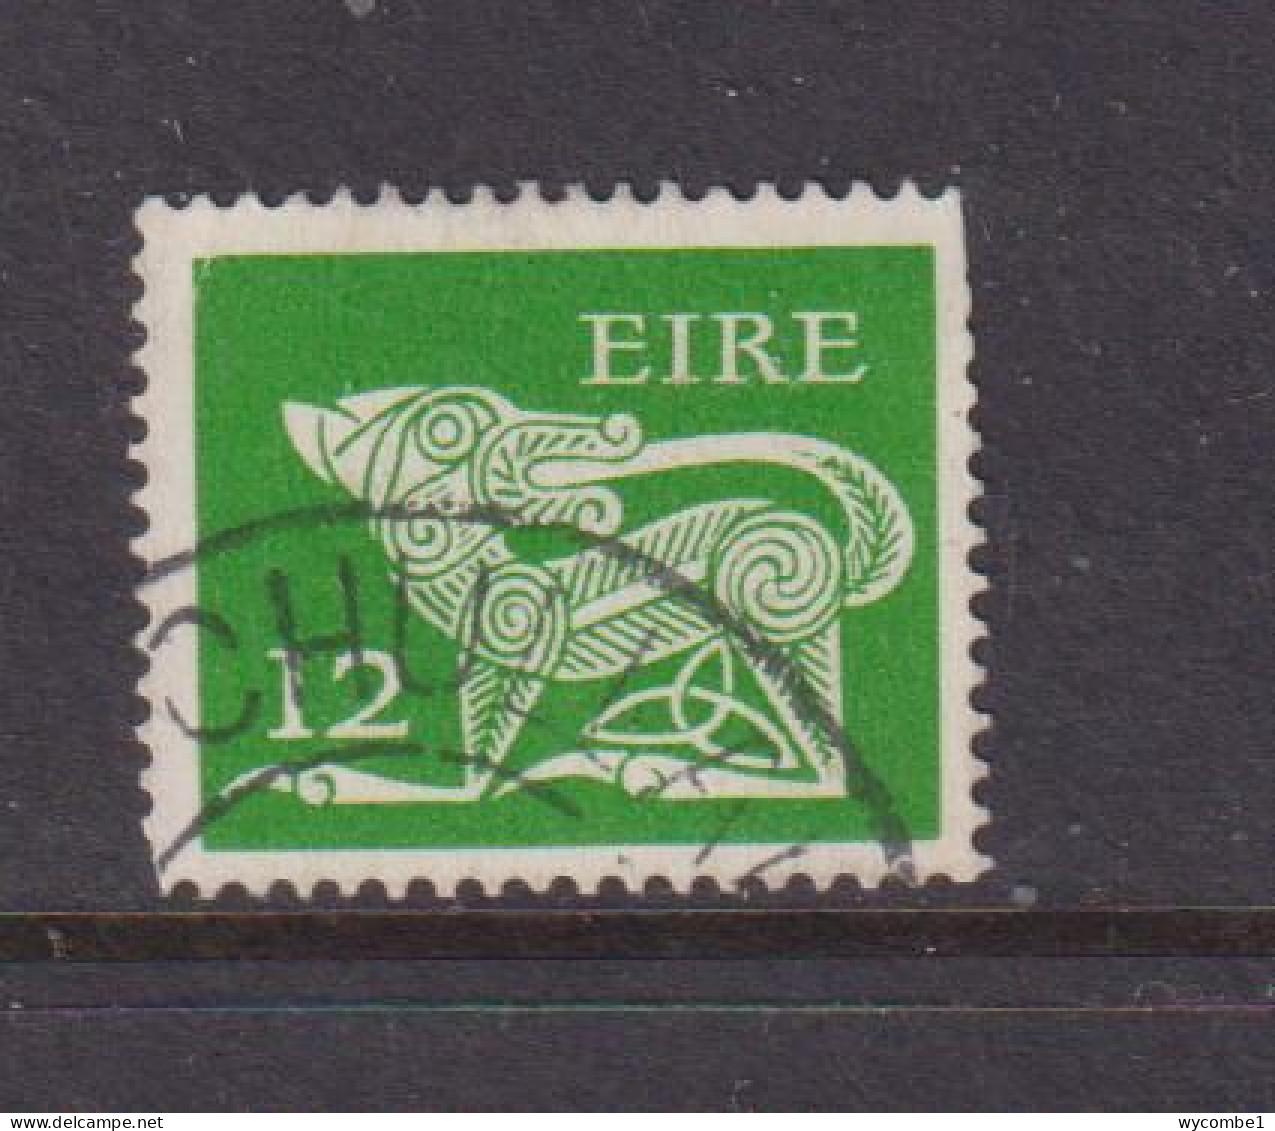 IRELAND - 1971  Decimal Currency Definitives  12p Used As Scan - Usati